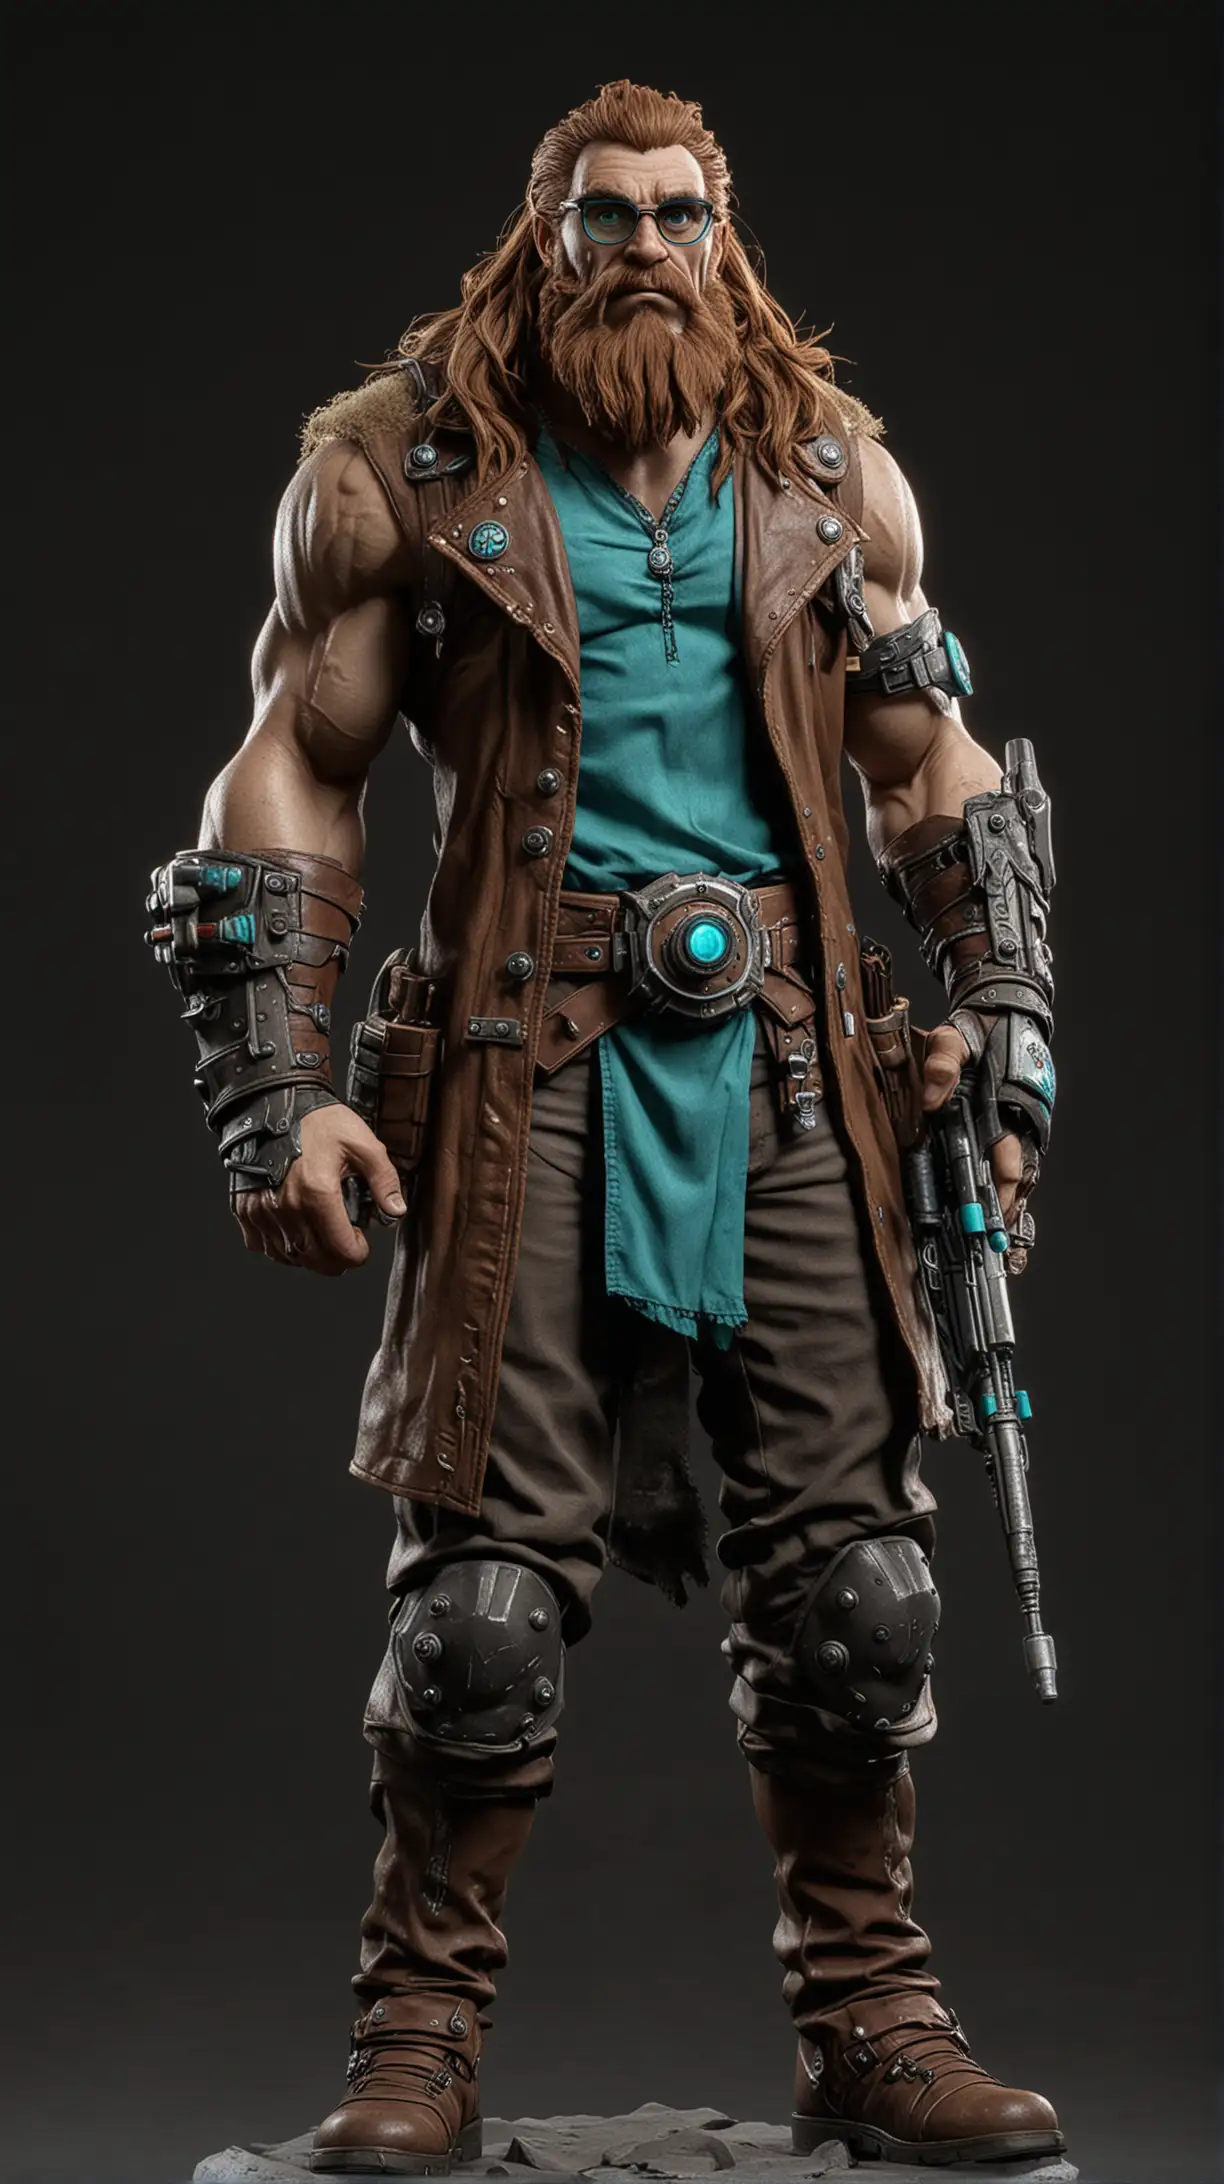 Male, giant, really long brown hair, cyan ogryn warhammer outfit, glasses, hero pose, black stage background, pixar themed, *show full body*, holding rocket launcher